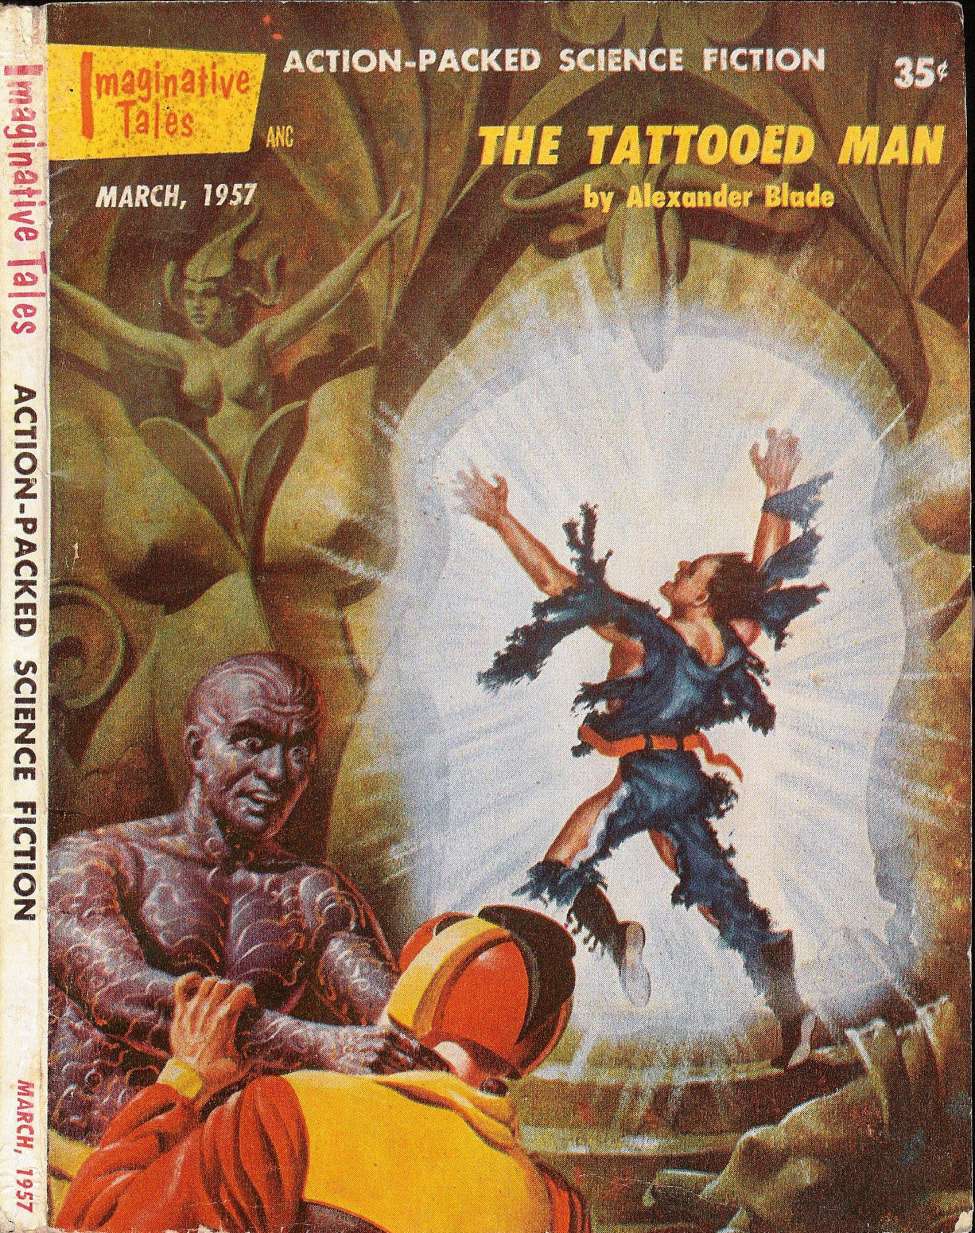 Comic Book Cover For Imaginative Tales v4 2 - The Tattooed Man - Alexander Blade